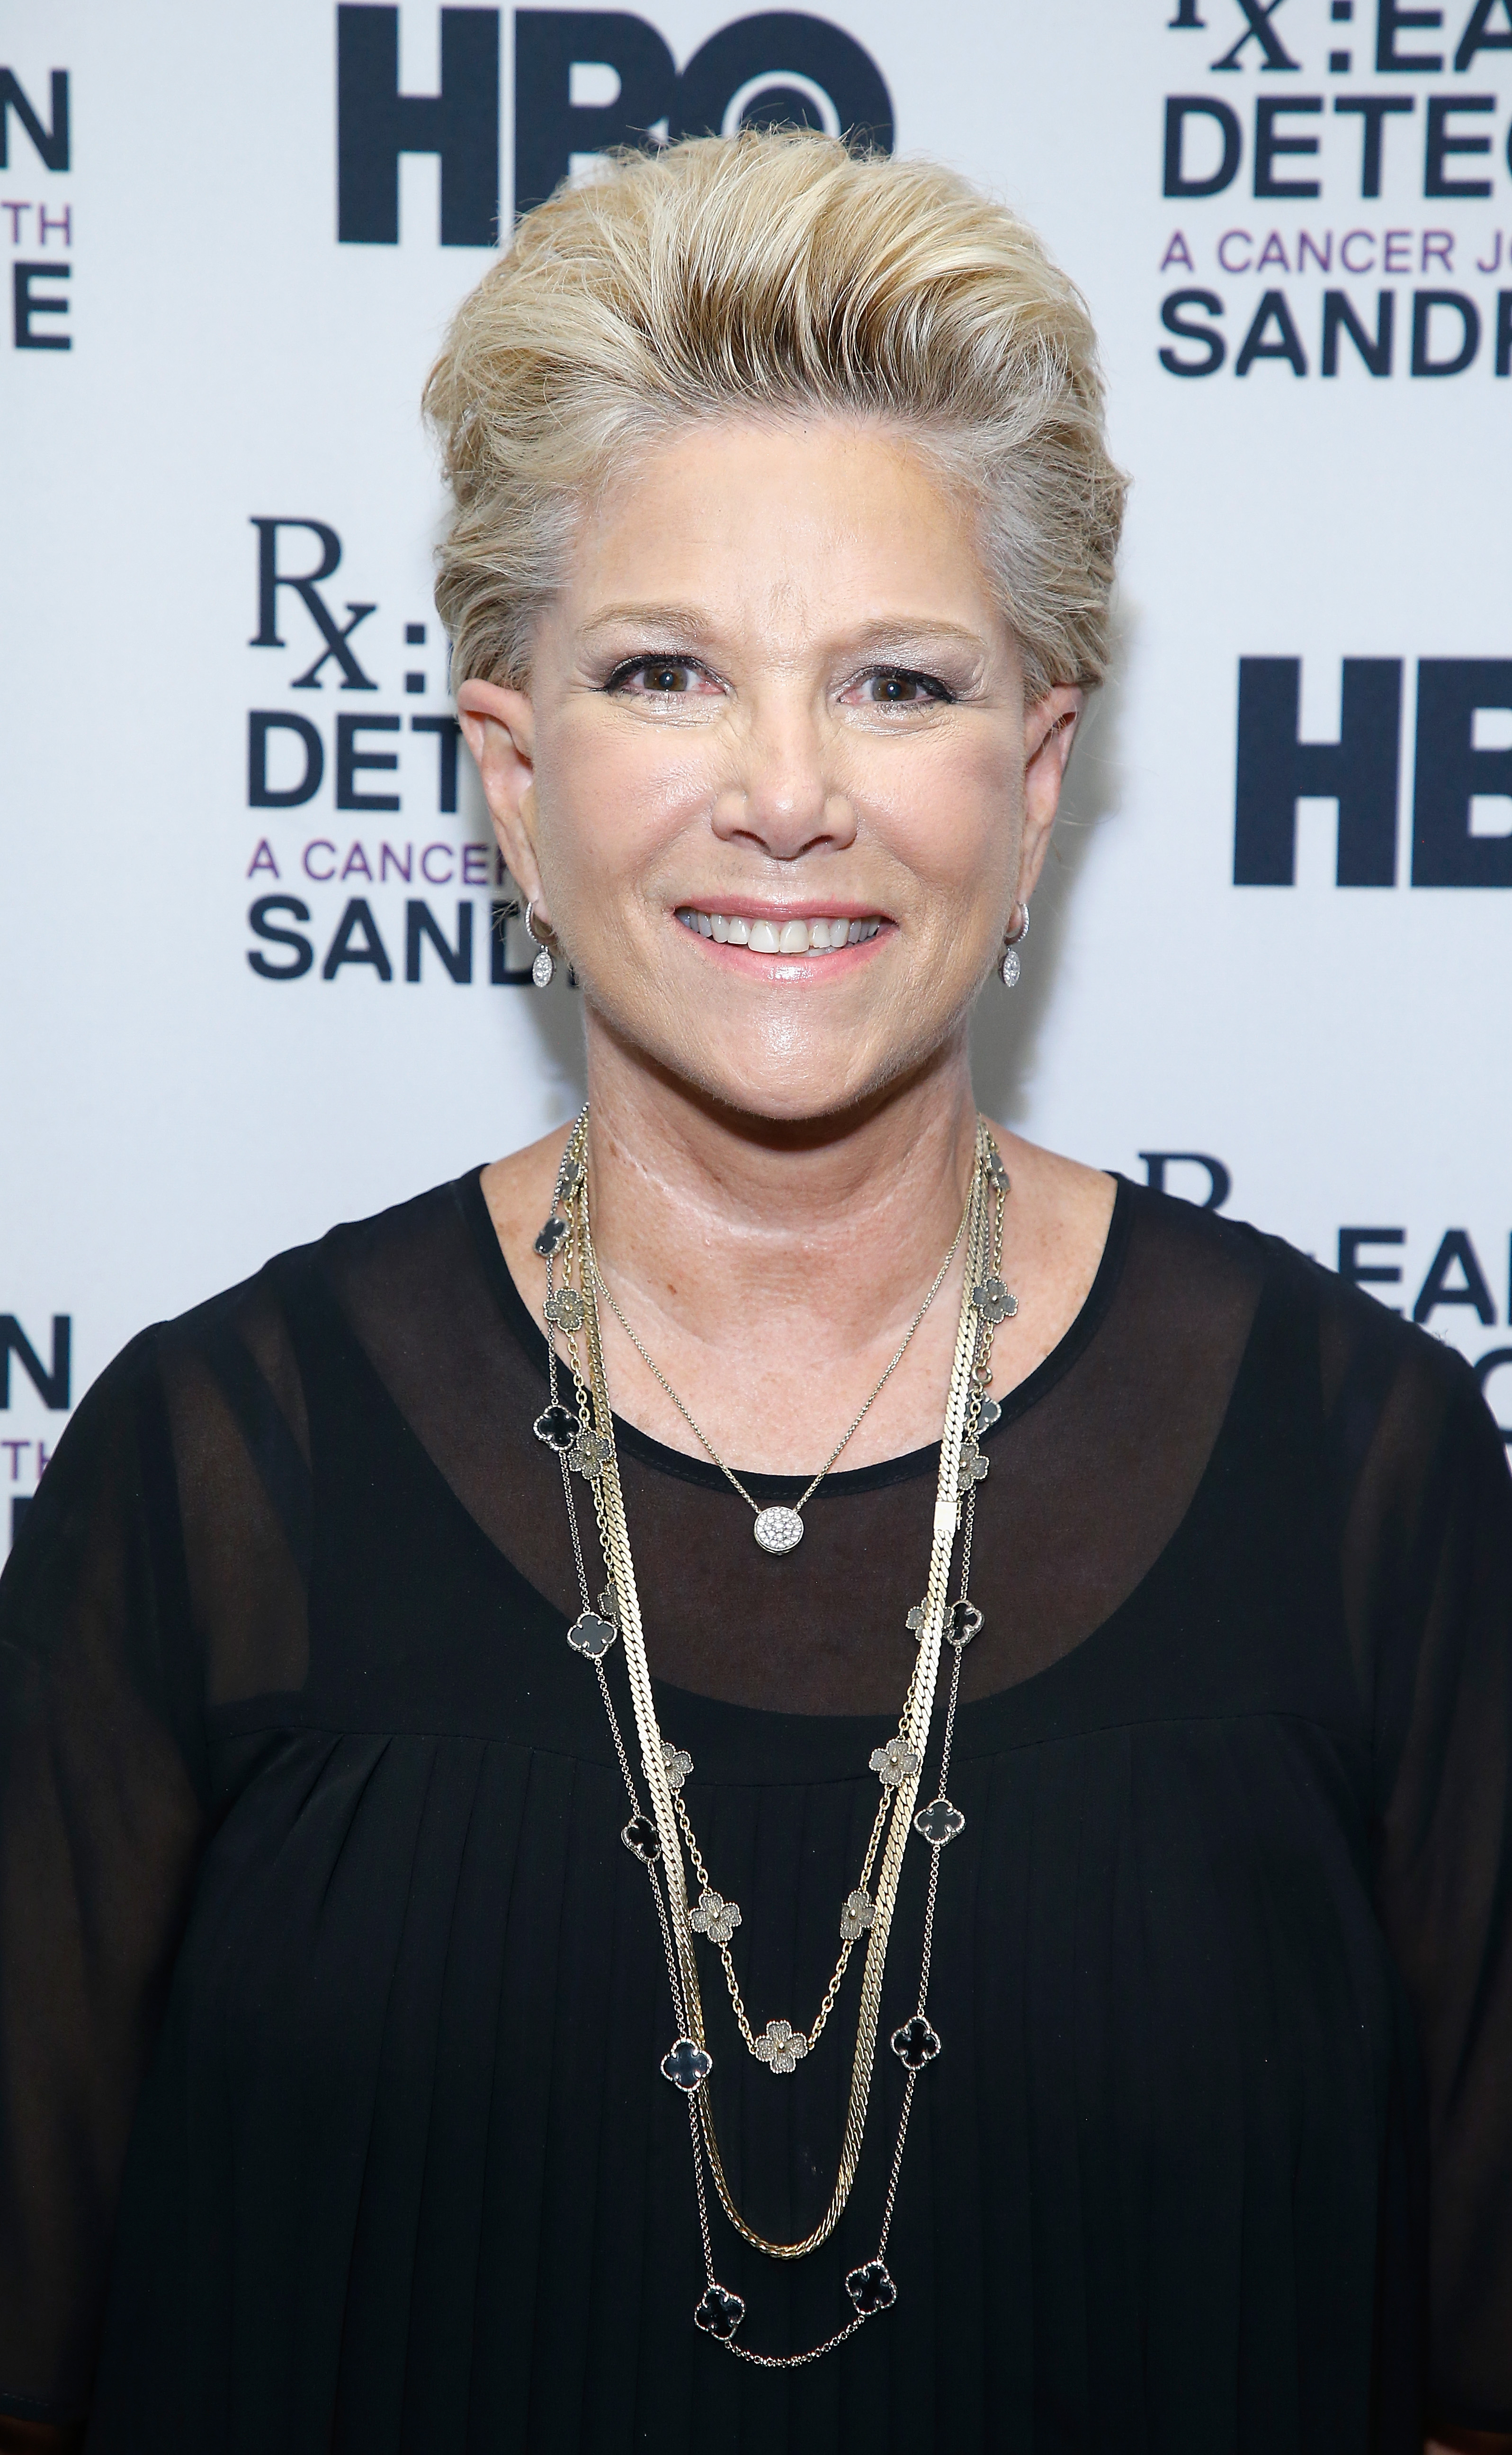 Joan Lunden at the "RX: Early Detection A Cancer Journey With Sandra Lee" screening in New York City on October 2, 2018. | Source: Getty Images